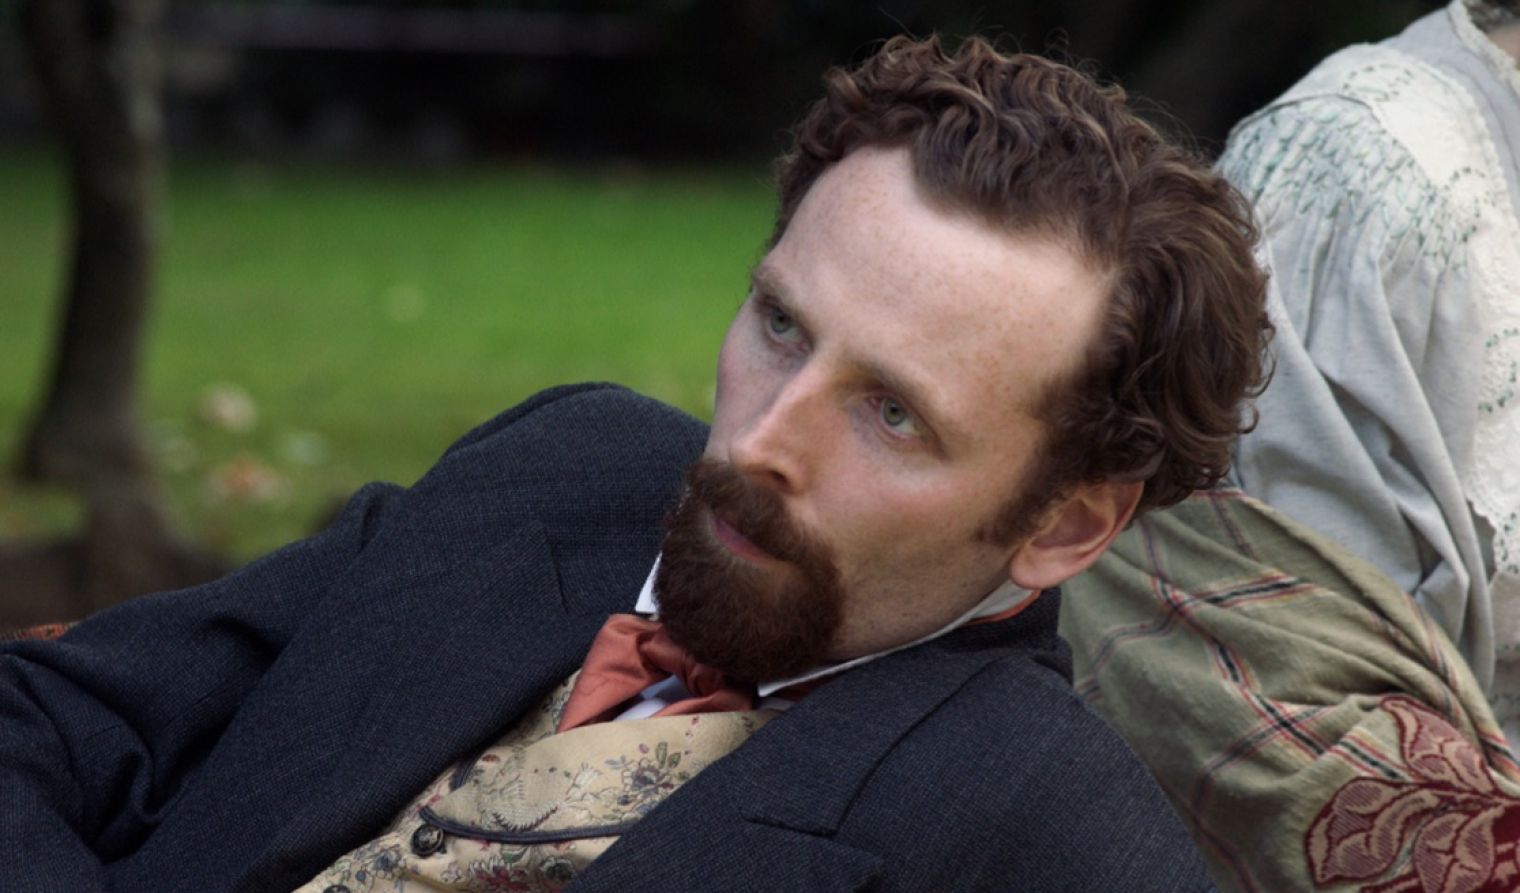 Edward Ashley stars as painter and poet Dante Gabriel Rossetti in new film ’The Worst Man in London’